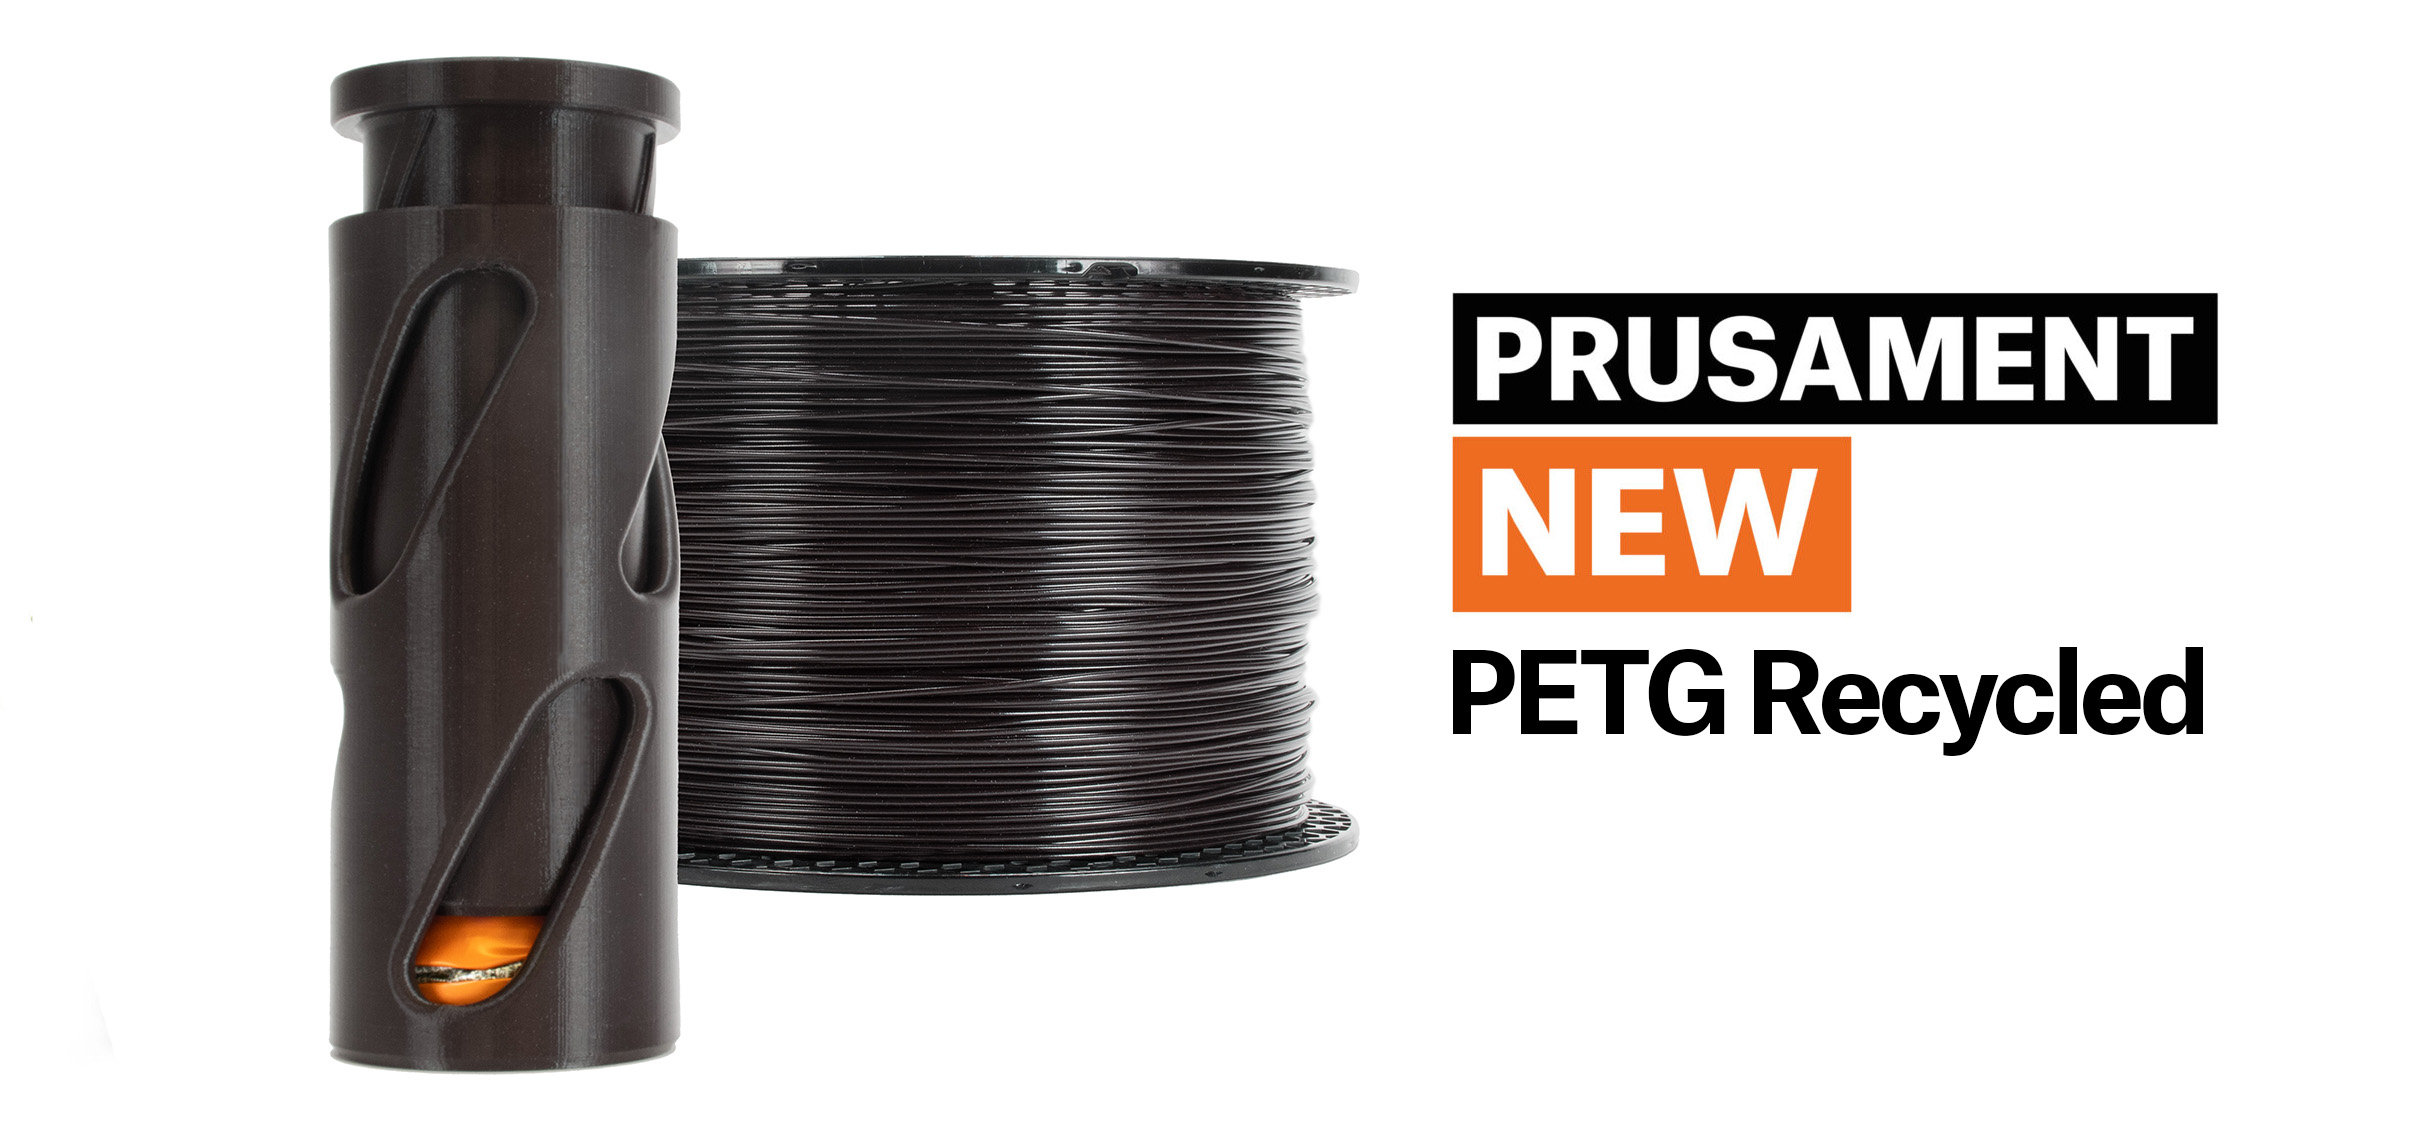 Introducing Prusament PETG recycled with calculated life cycle assessment!  - Original Prusa 3D Printers